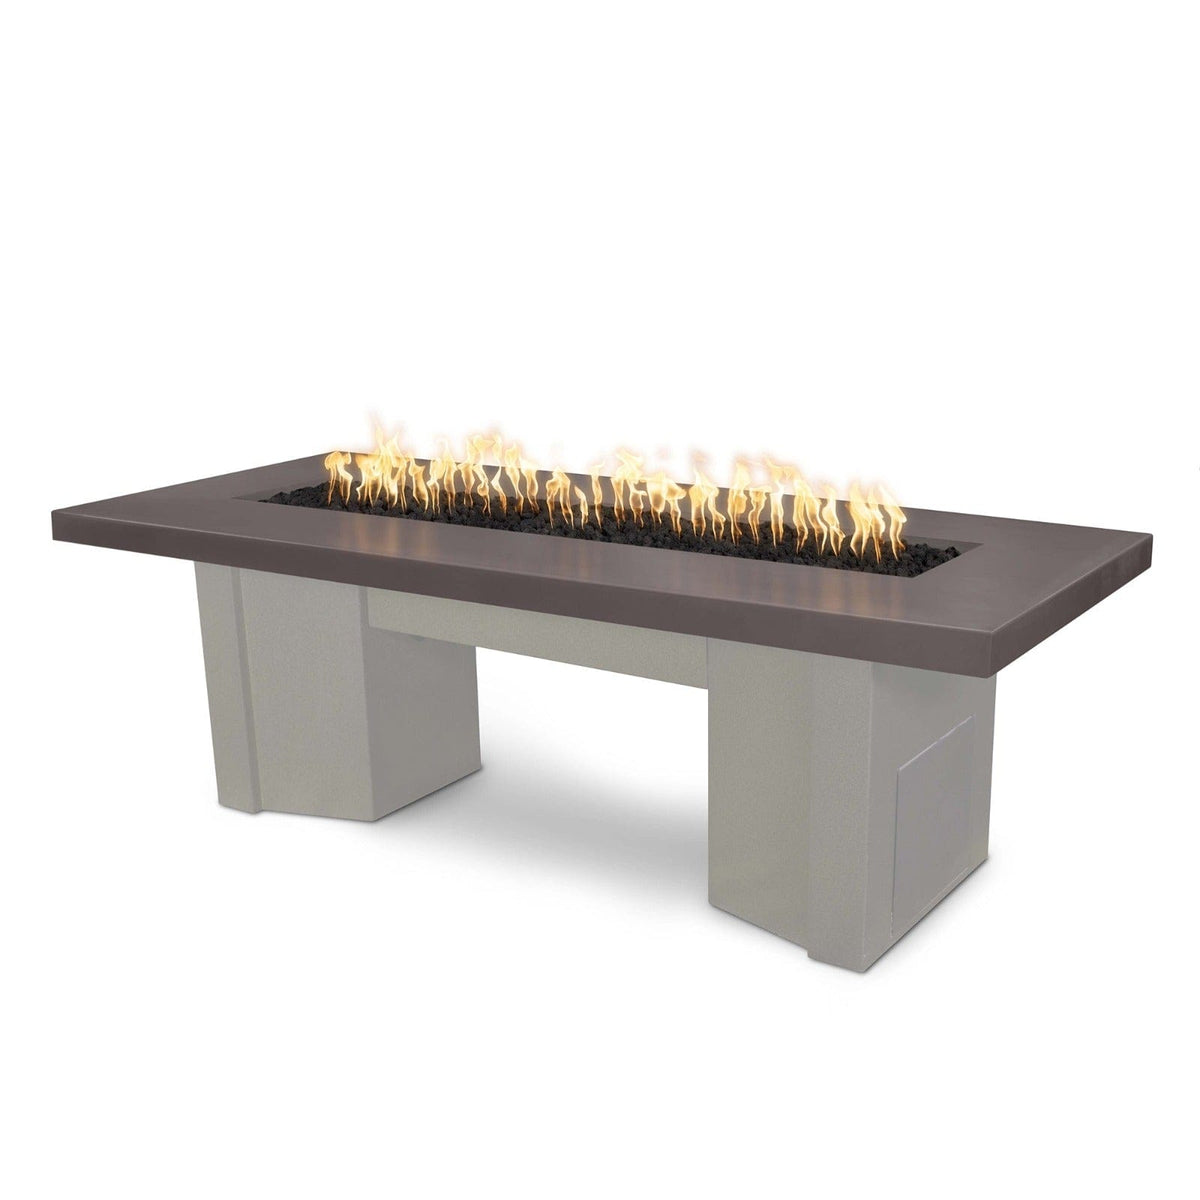 The Outdoor Plus Fire Features Chestnut (-CST) / Pewter Powder Coated Steel (-PEW) The Outdoor Plus 78&quot; Alameda Fire Table Smooth Concrete in Natural Gas - Flame Sense System with Push Button Spark Igniter / OPT-ALMGFRC78FSEN-NG